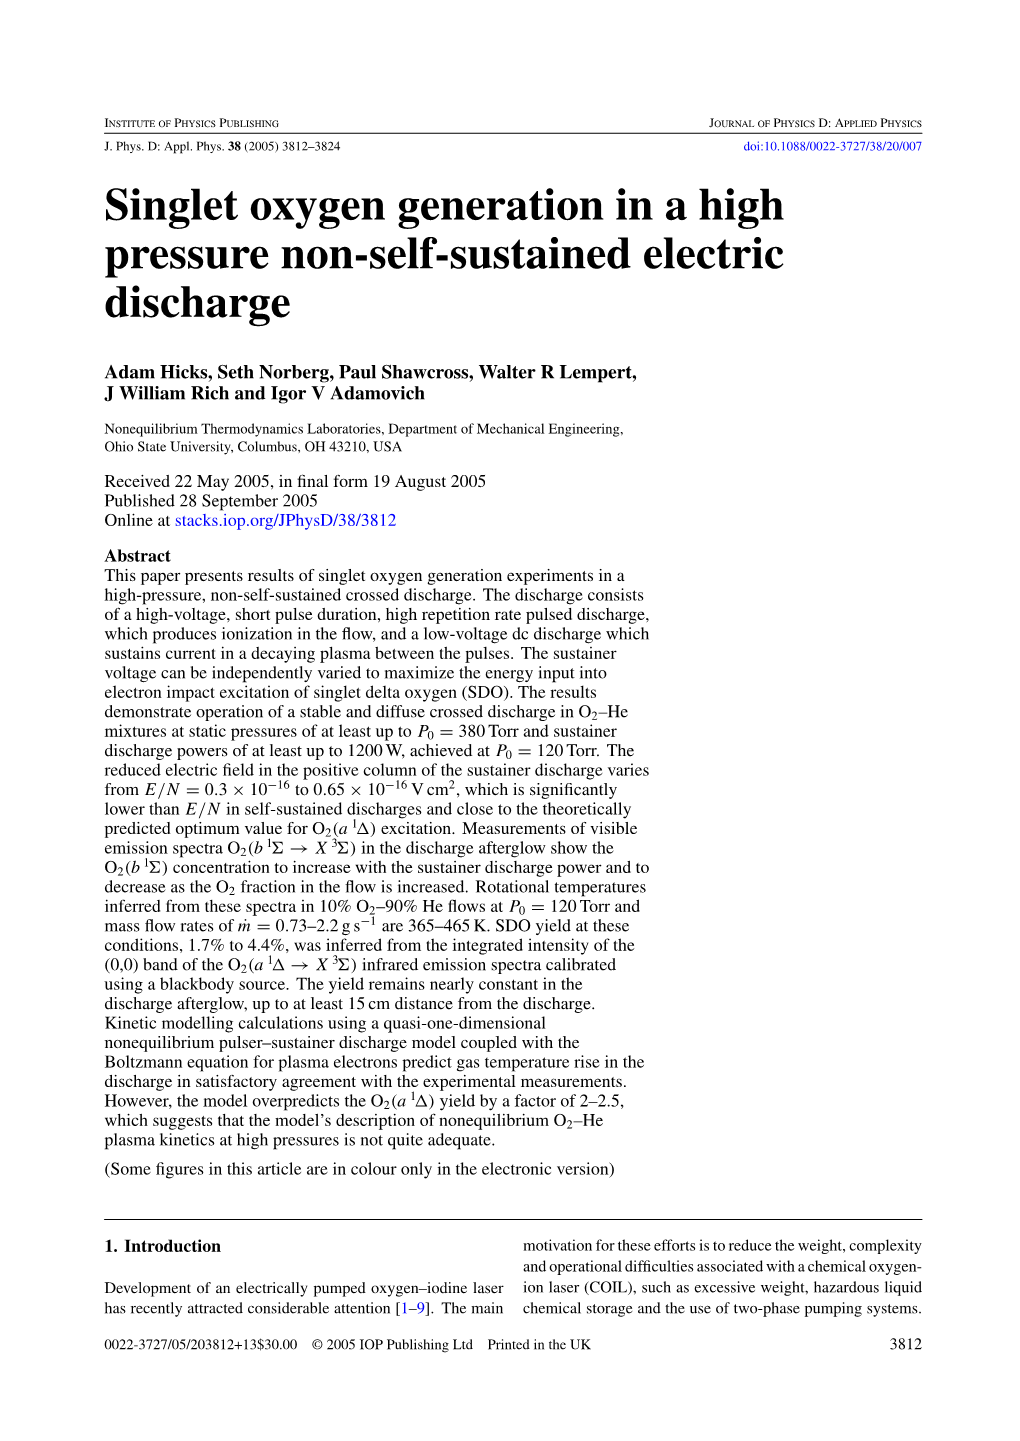 Singlet Oxygen Generation in a High Pressure Non-Self-Sustained Electric Discharge